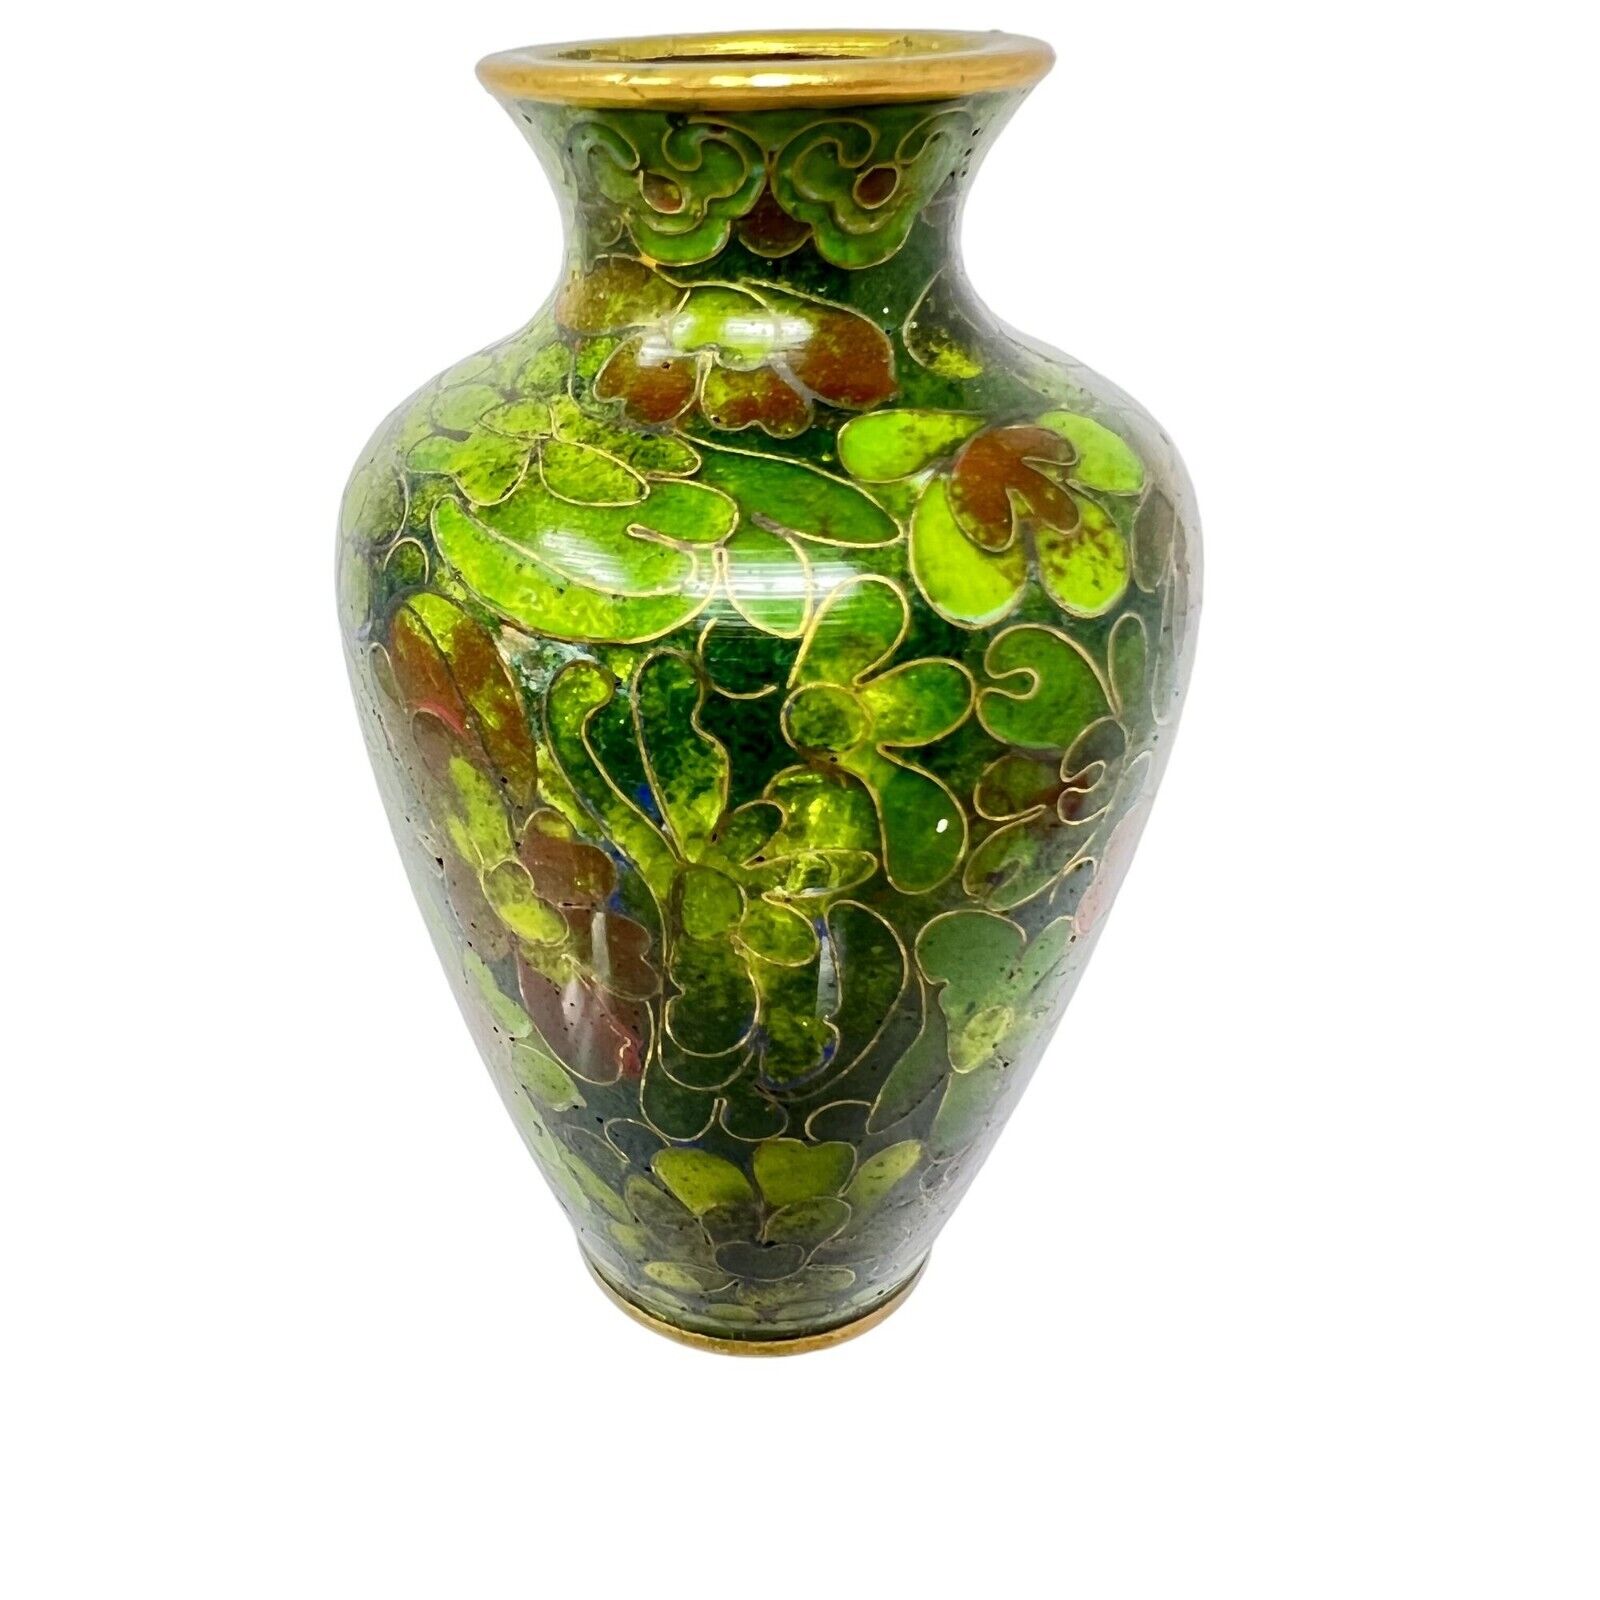 Vintage Chinese Cloisonné Vase Green Traditional Asian design 3 Inches Tall 1-3